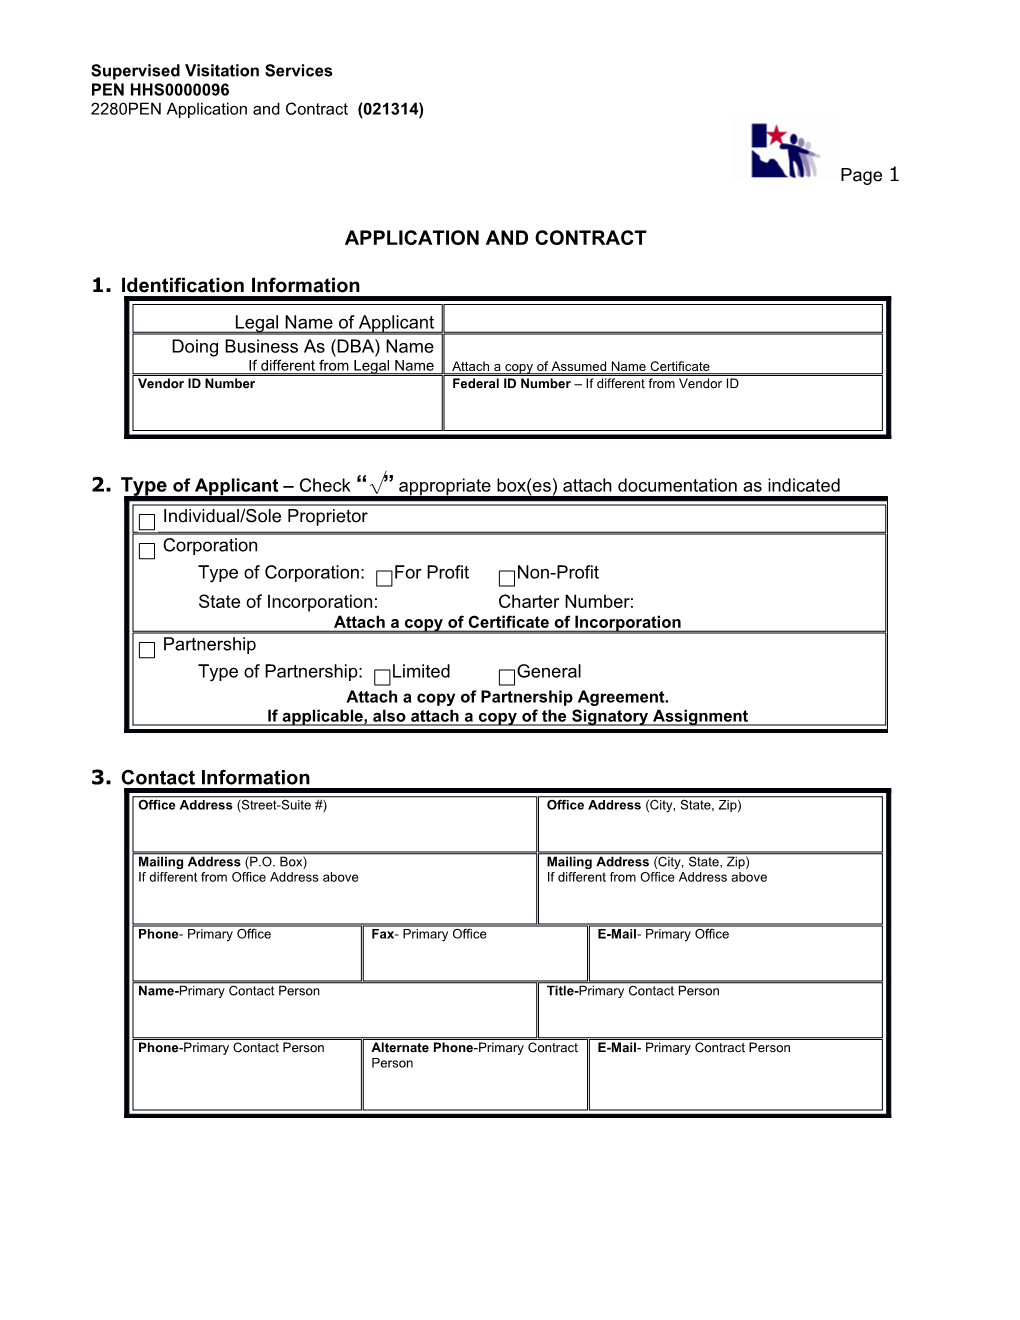 Application and Contract